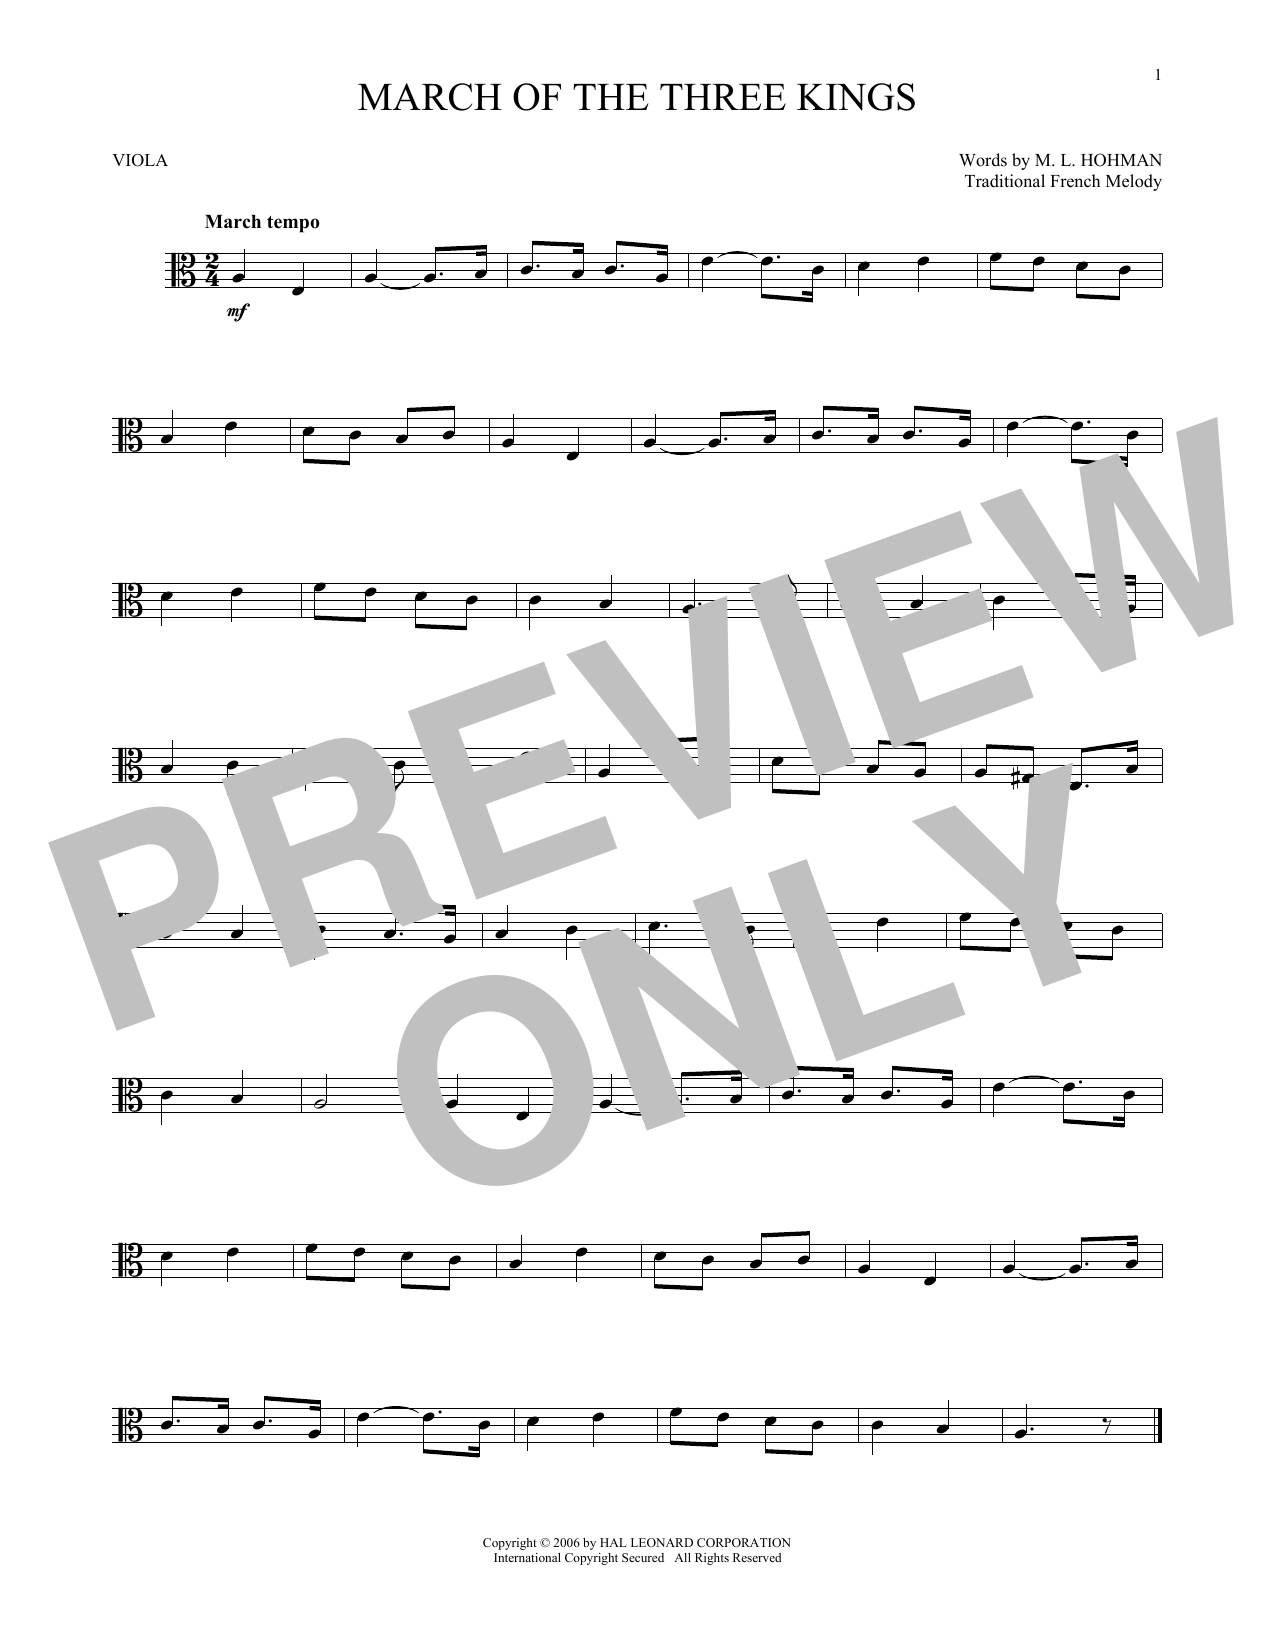 Download Traditional March Of The Three Kings Sheet Music